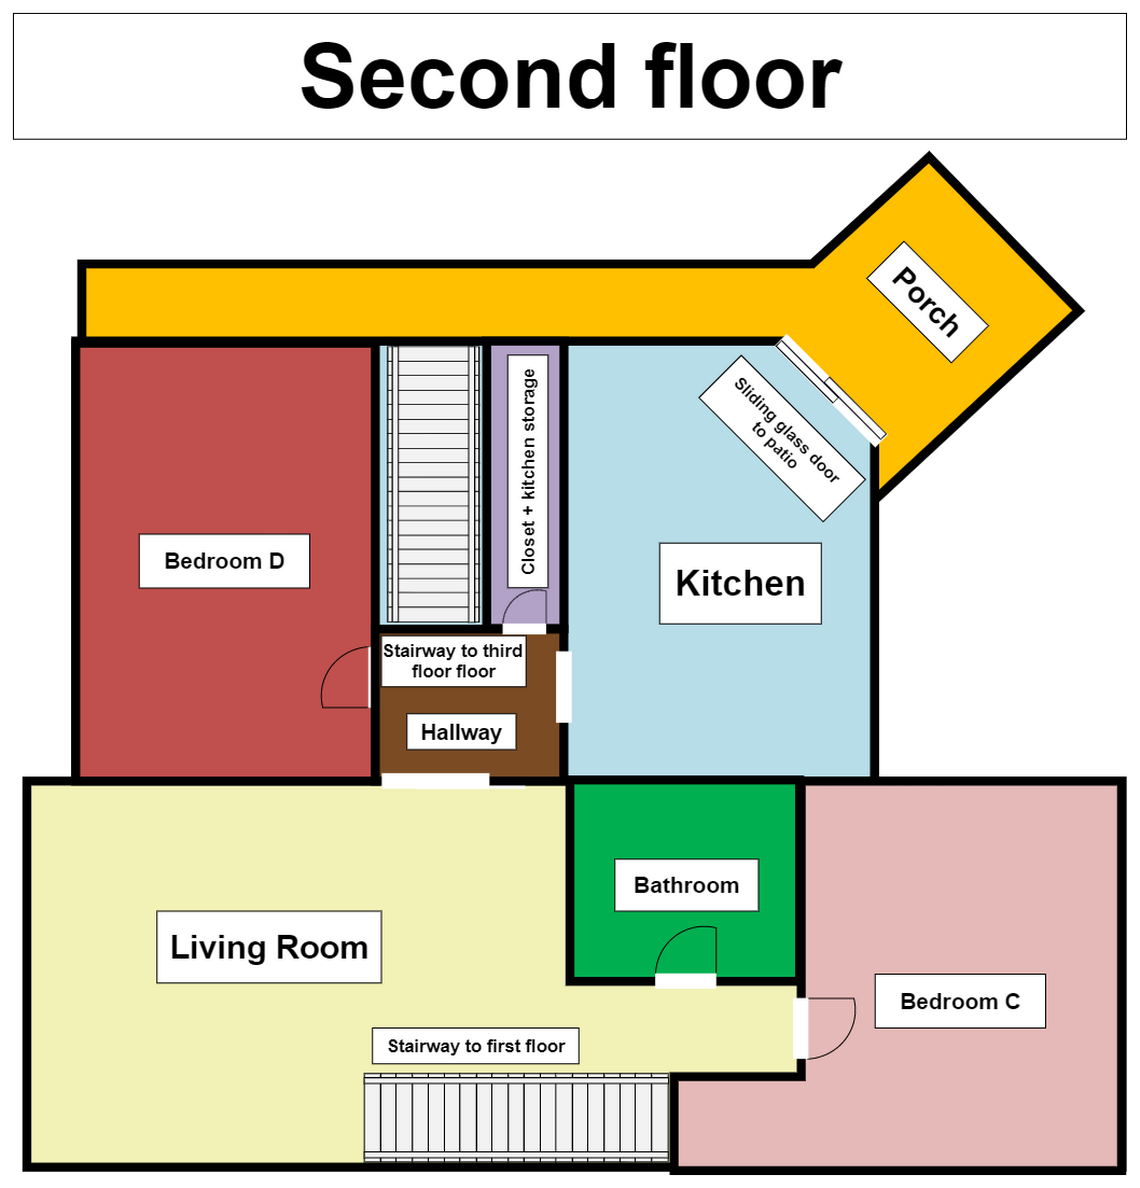 Layout of the second floor of the Moscow home where the homicides took place.